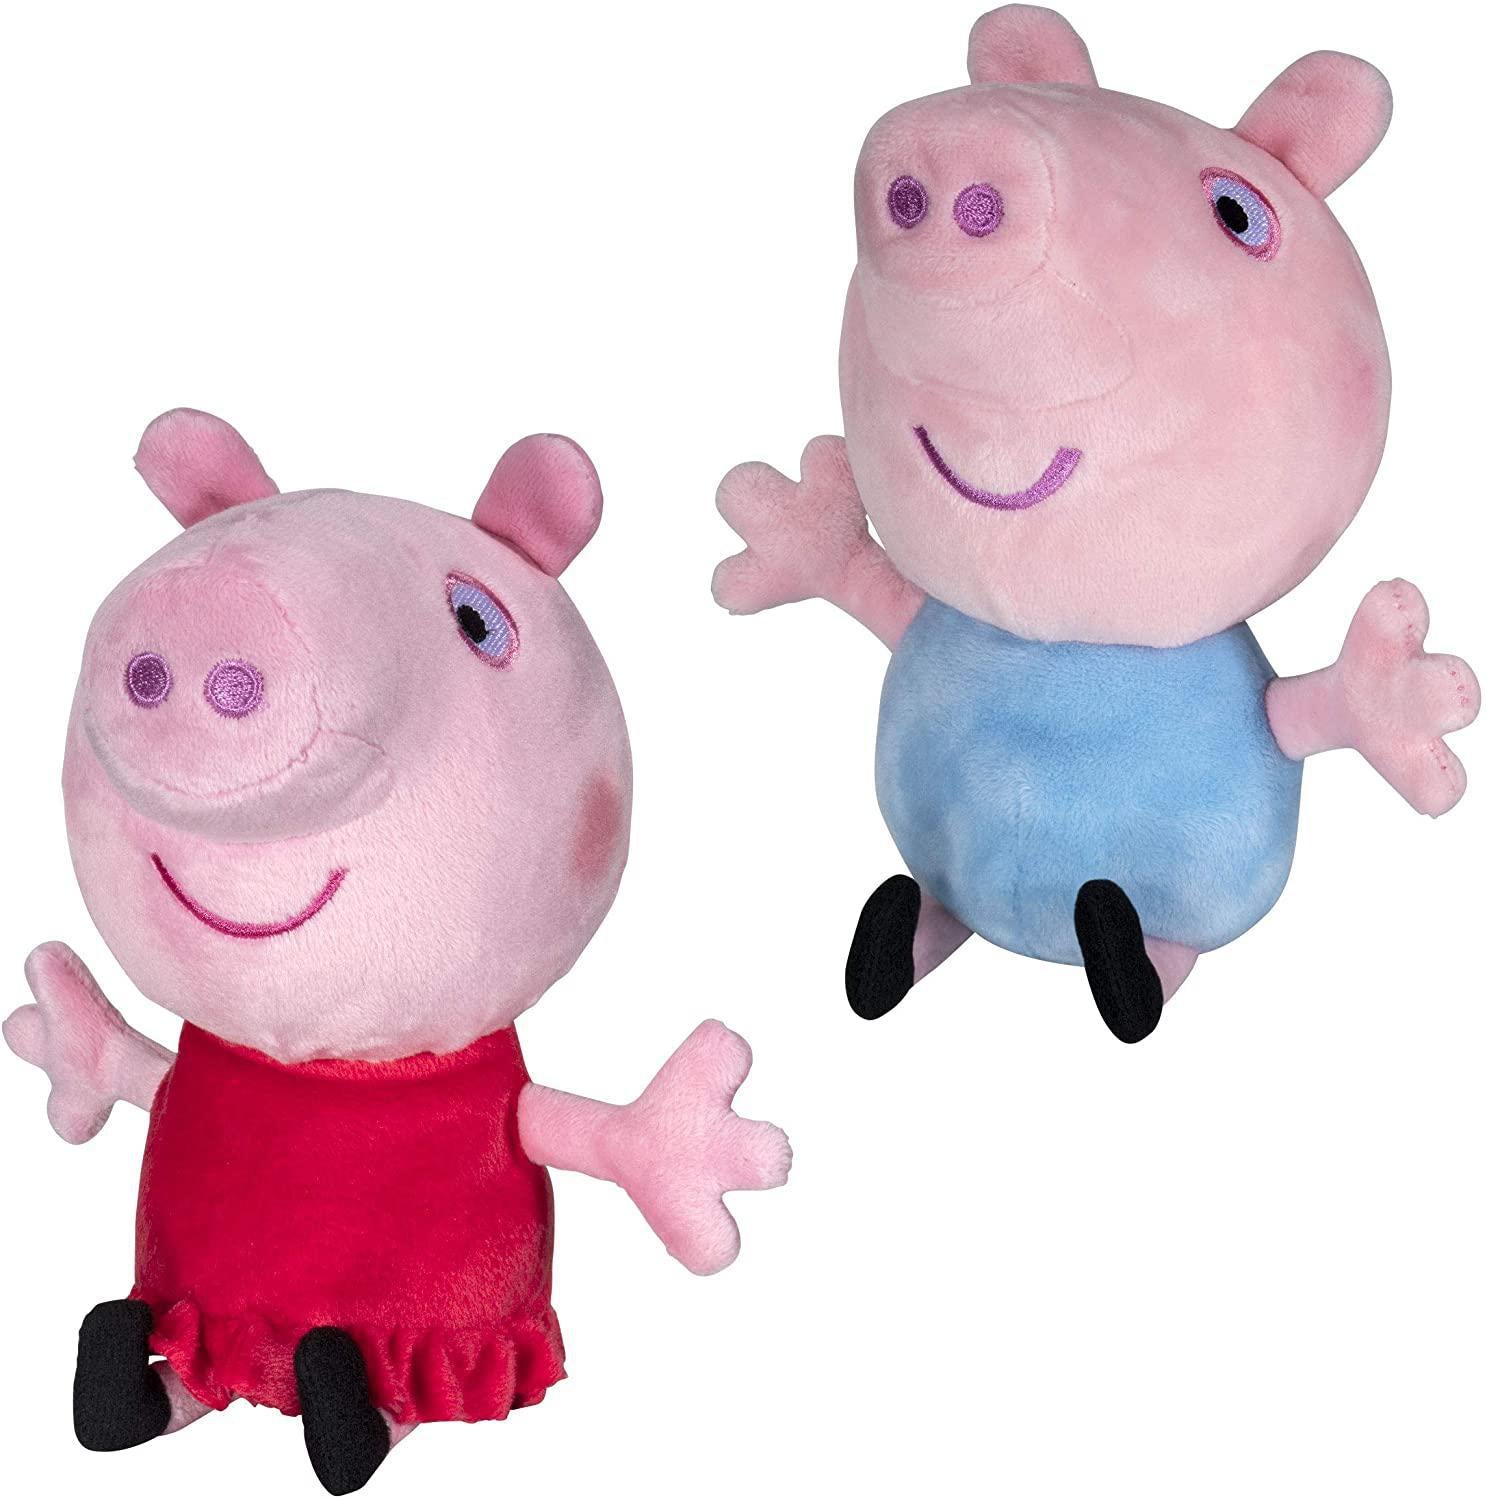 Peppa Pig Peppa's Adventures / Peppa's Everyday Experiences Playset -  Assorted | Toys”R”Us China Official Website